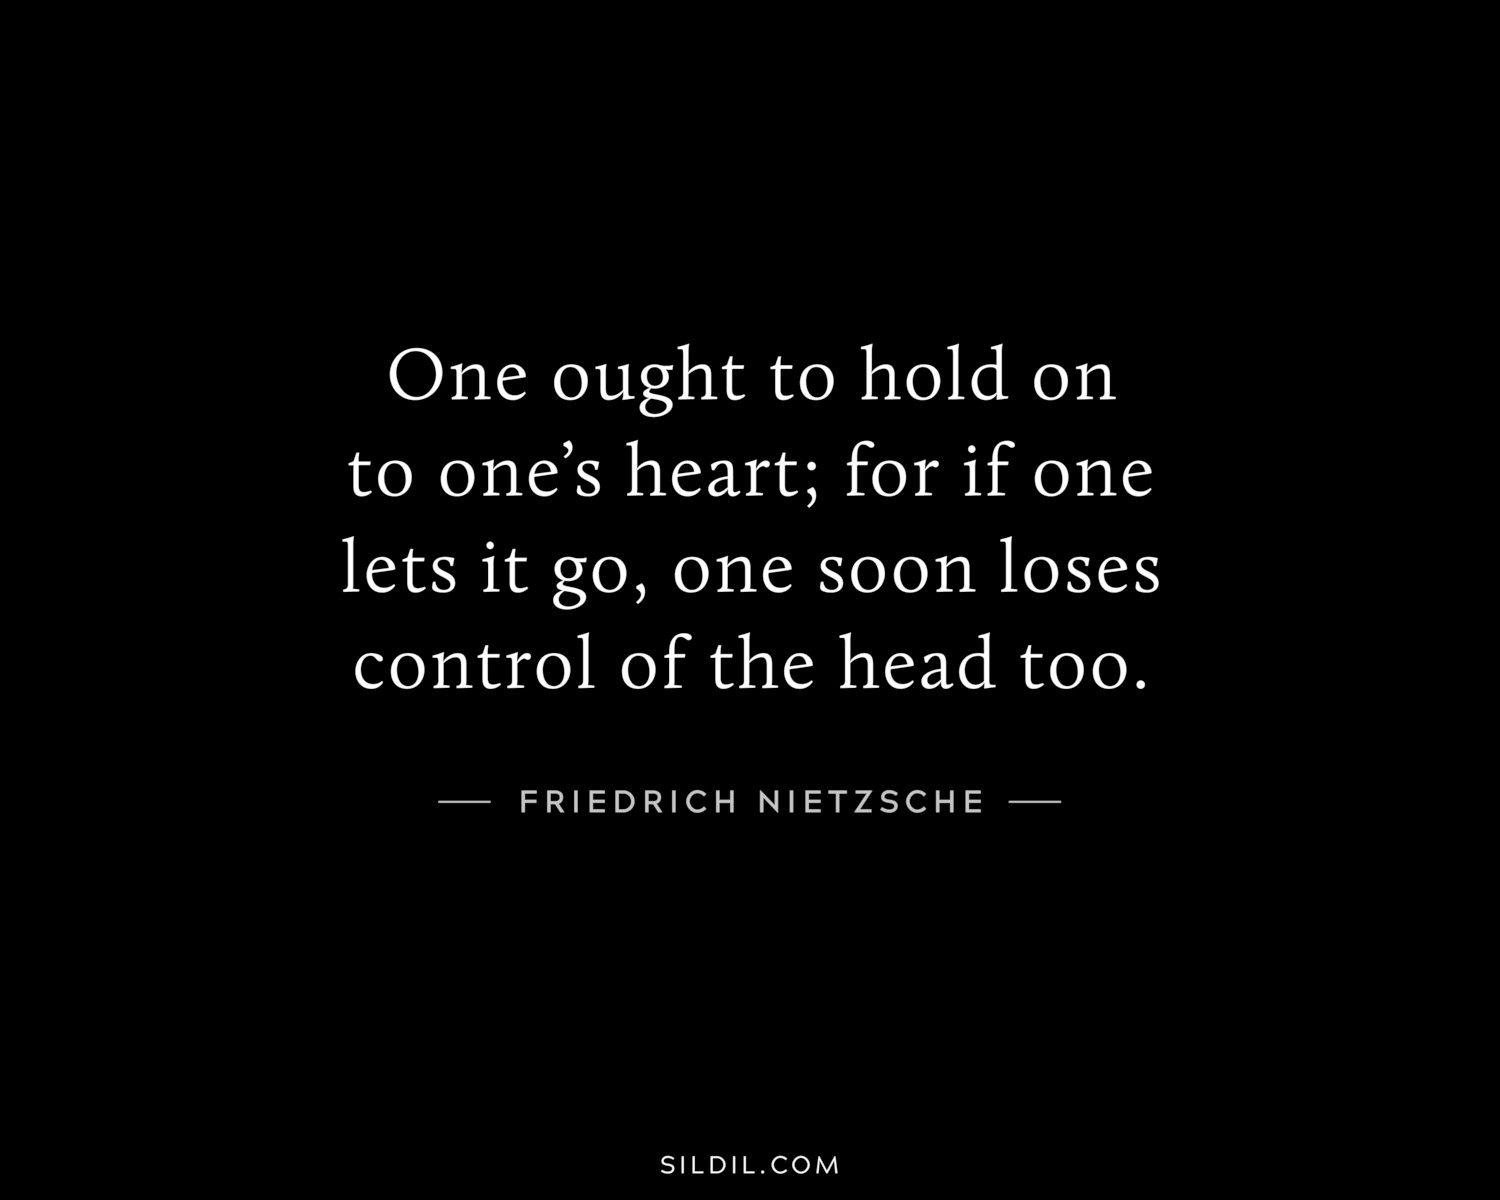 One ought to hold on to one’s heart; for if one lets it go, one soon loses control of the head too.